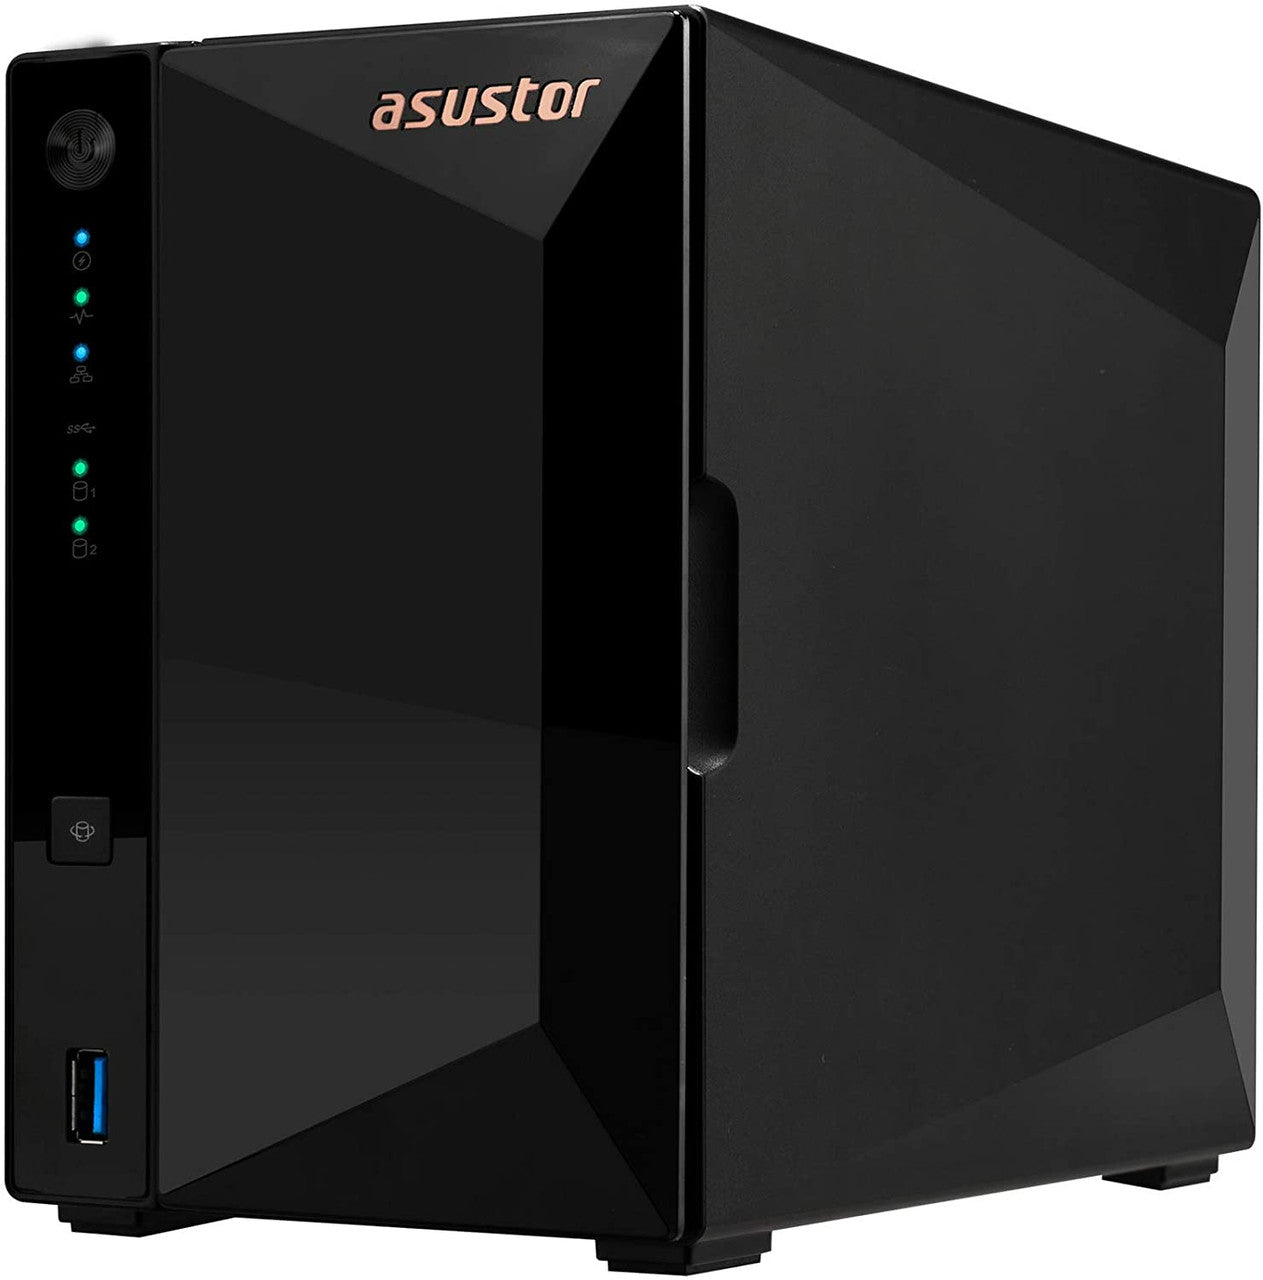 Asustor AS3302T 2-Bay Drivestor 2 PRO NAS with 2GB RAM and 4TB (2x2TB) Seagate Ironwolf NAS Drives Fully Assembled and Tested